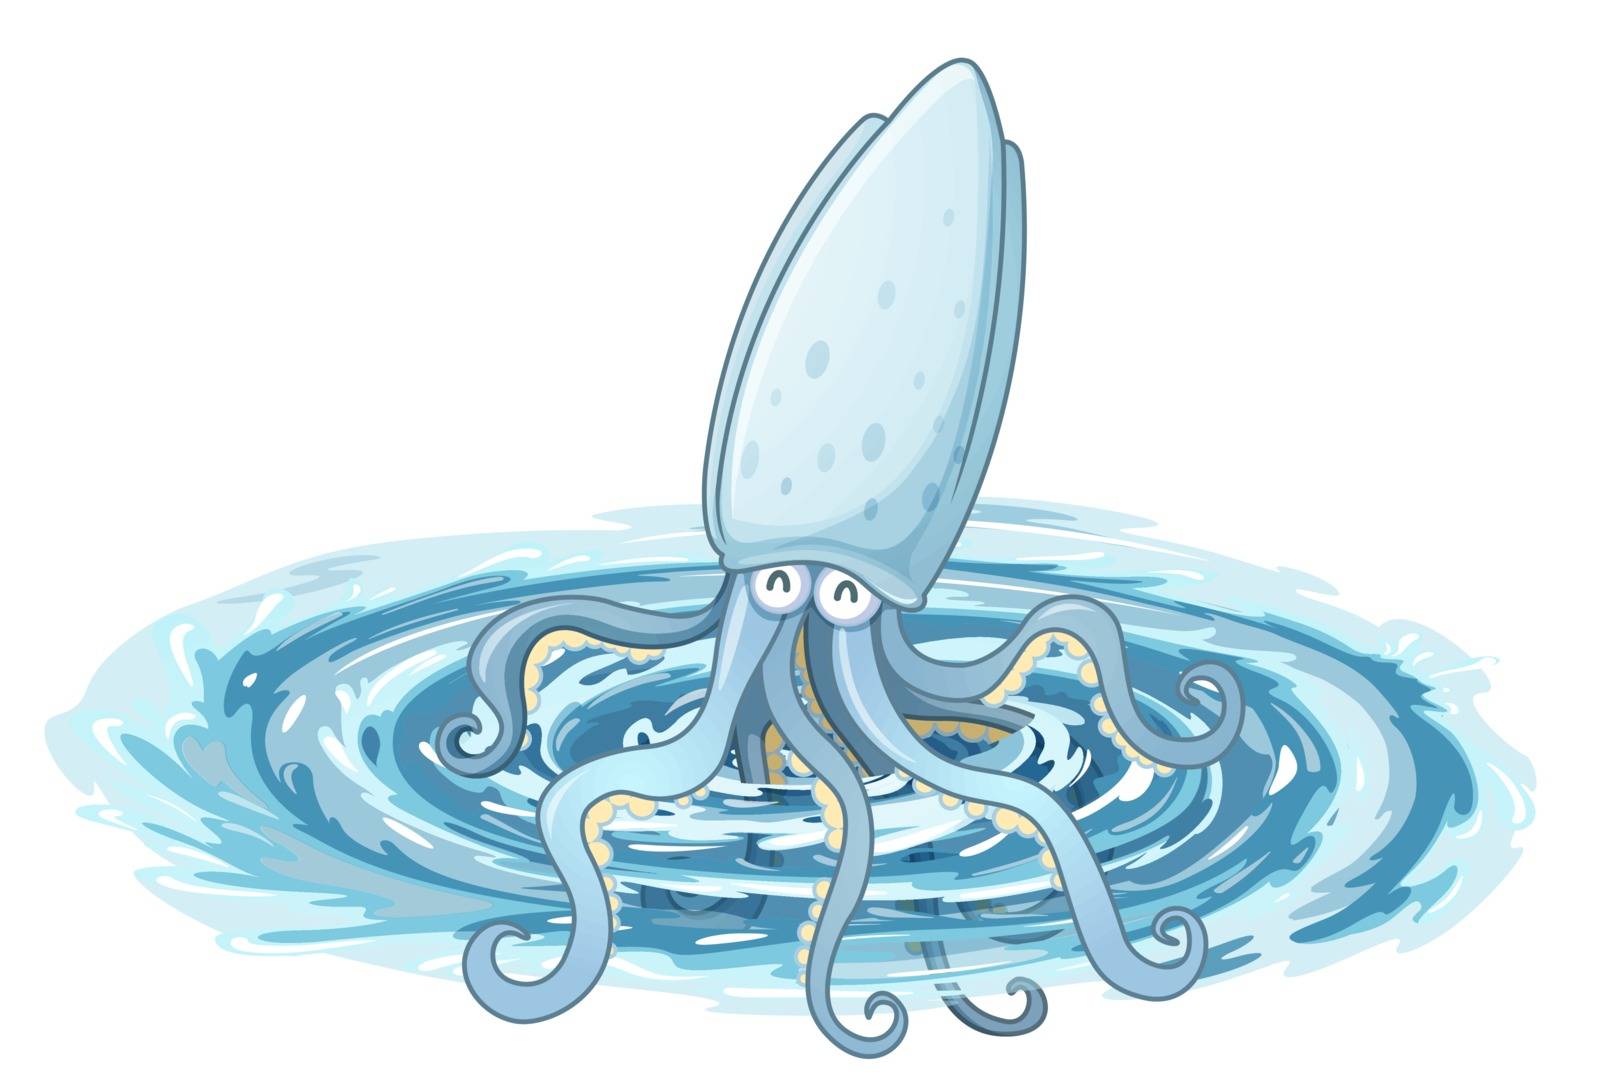 Illustration of a giant squid on a white background